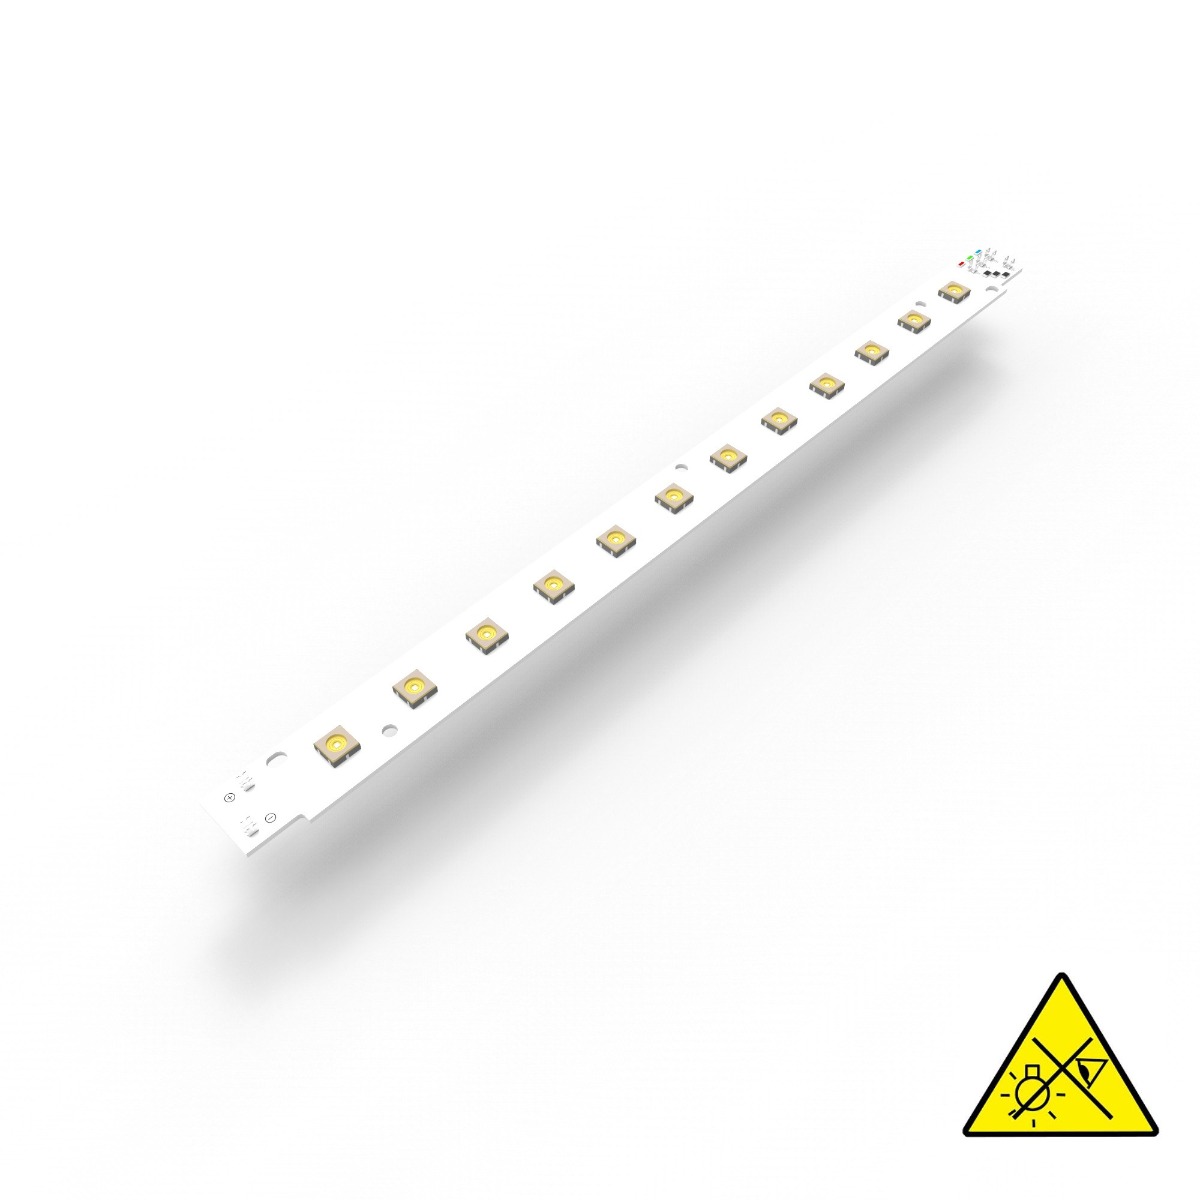 Violet UVC Seoul Viosys LED Strip 275nm 12 LEDs 264mW 11.02" 600mA for disinfection and sterilization 